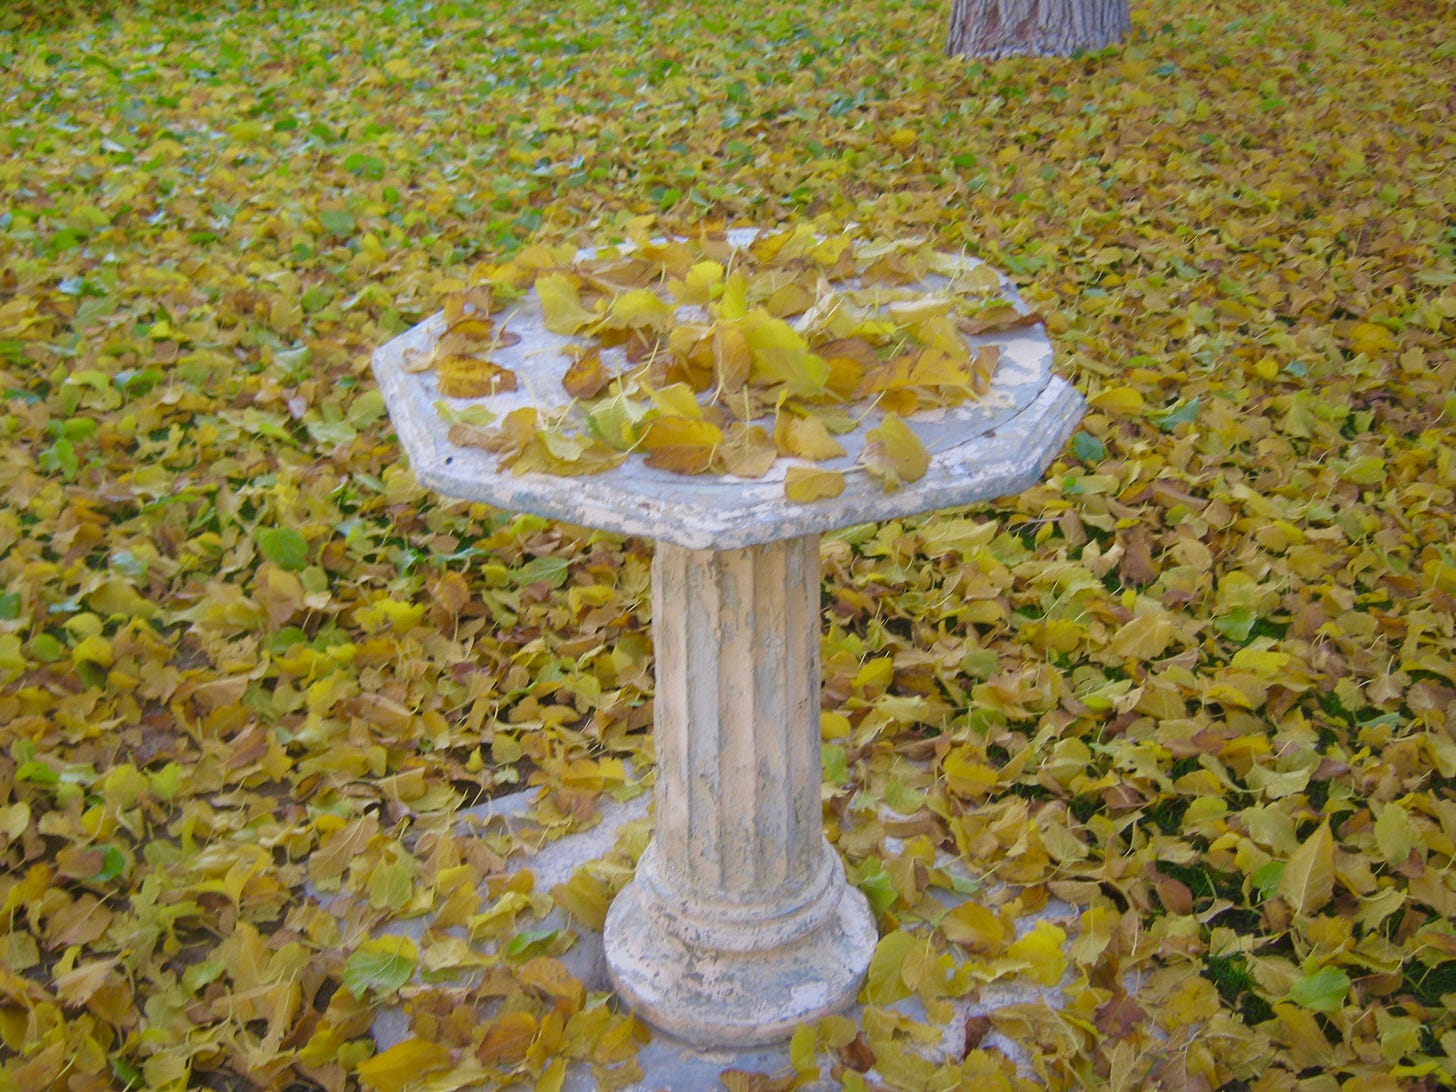 Photo by Sherry Killam Arts of yellow leaves covering a white birdbath and the ground around it.